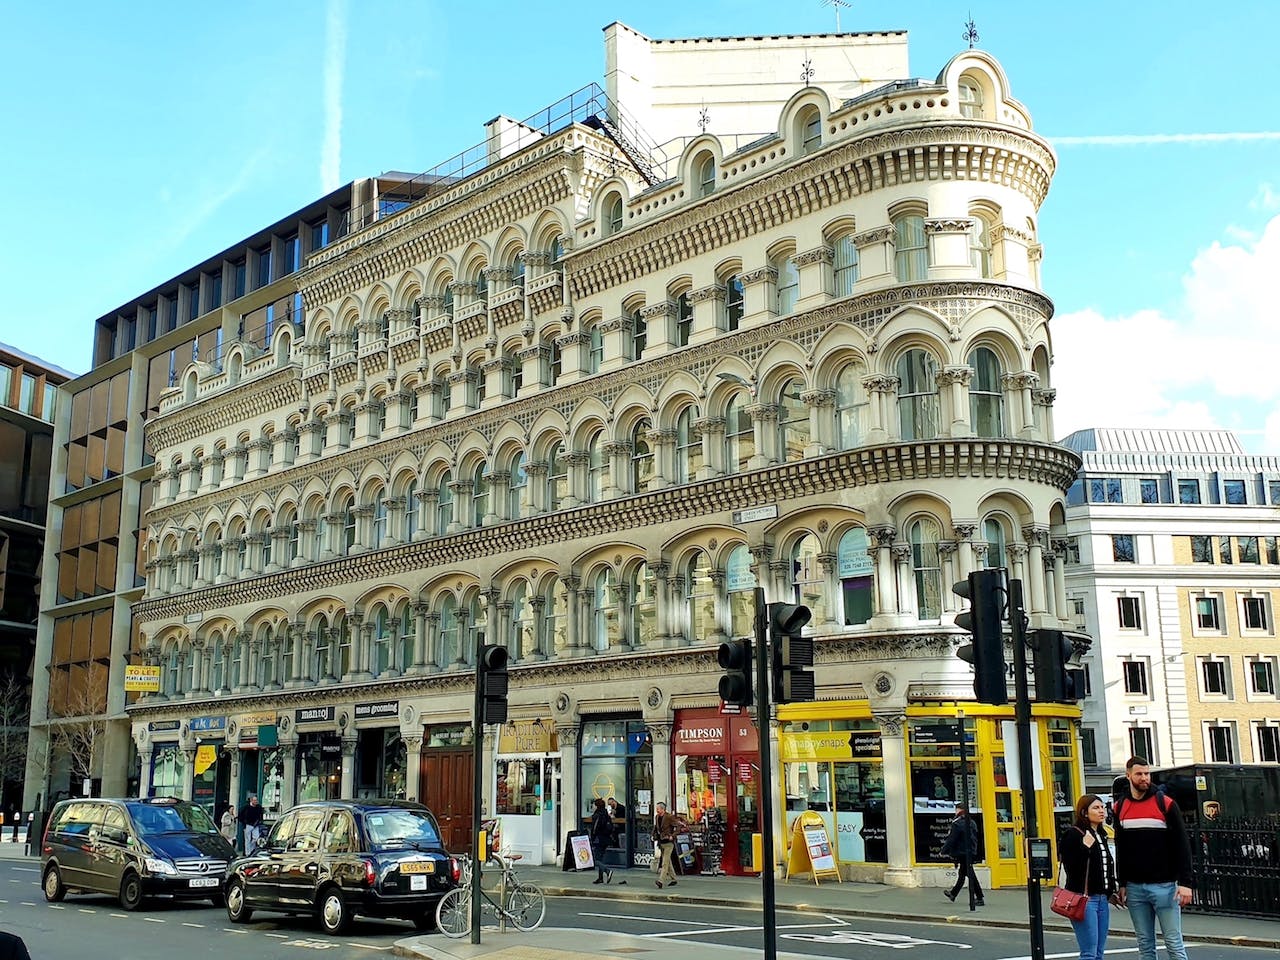 Cannon Street - 8 Person Office- Queen Victoria Street